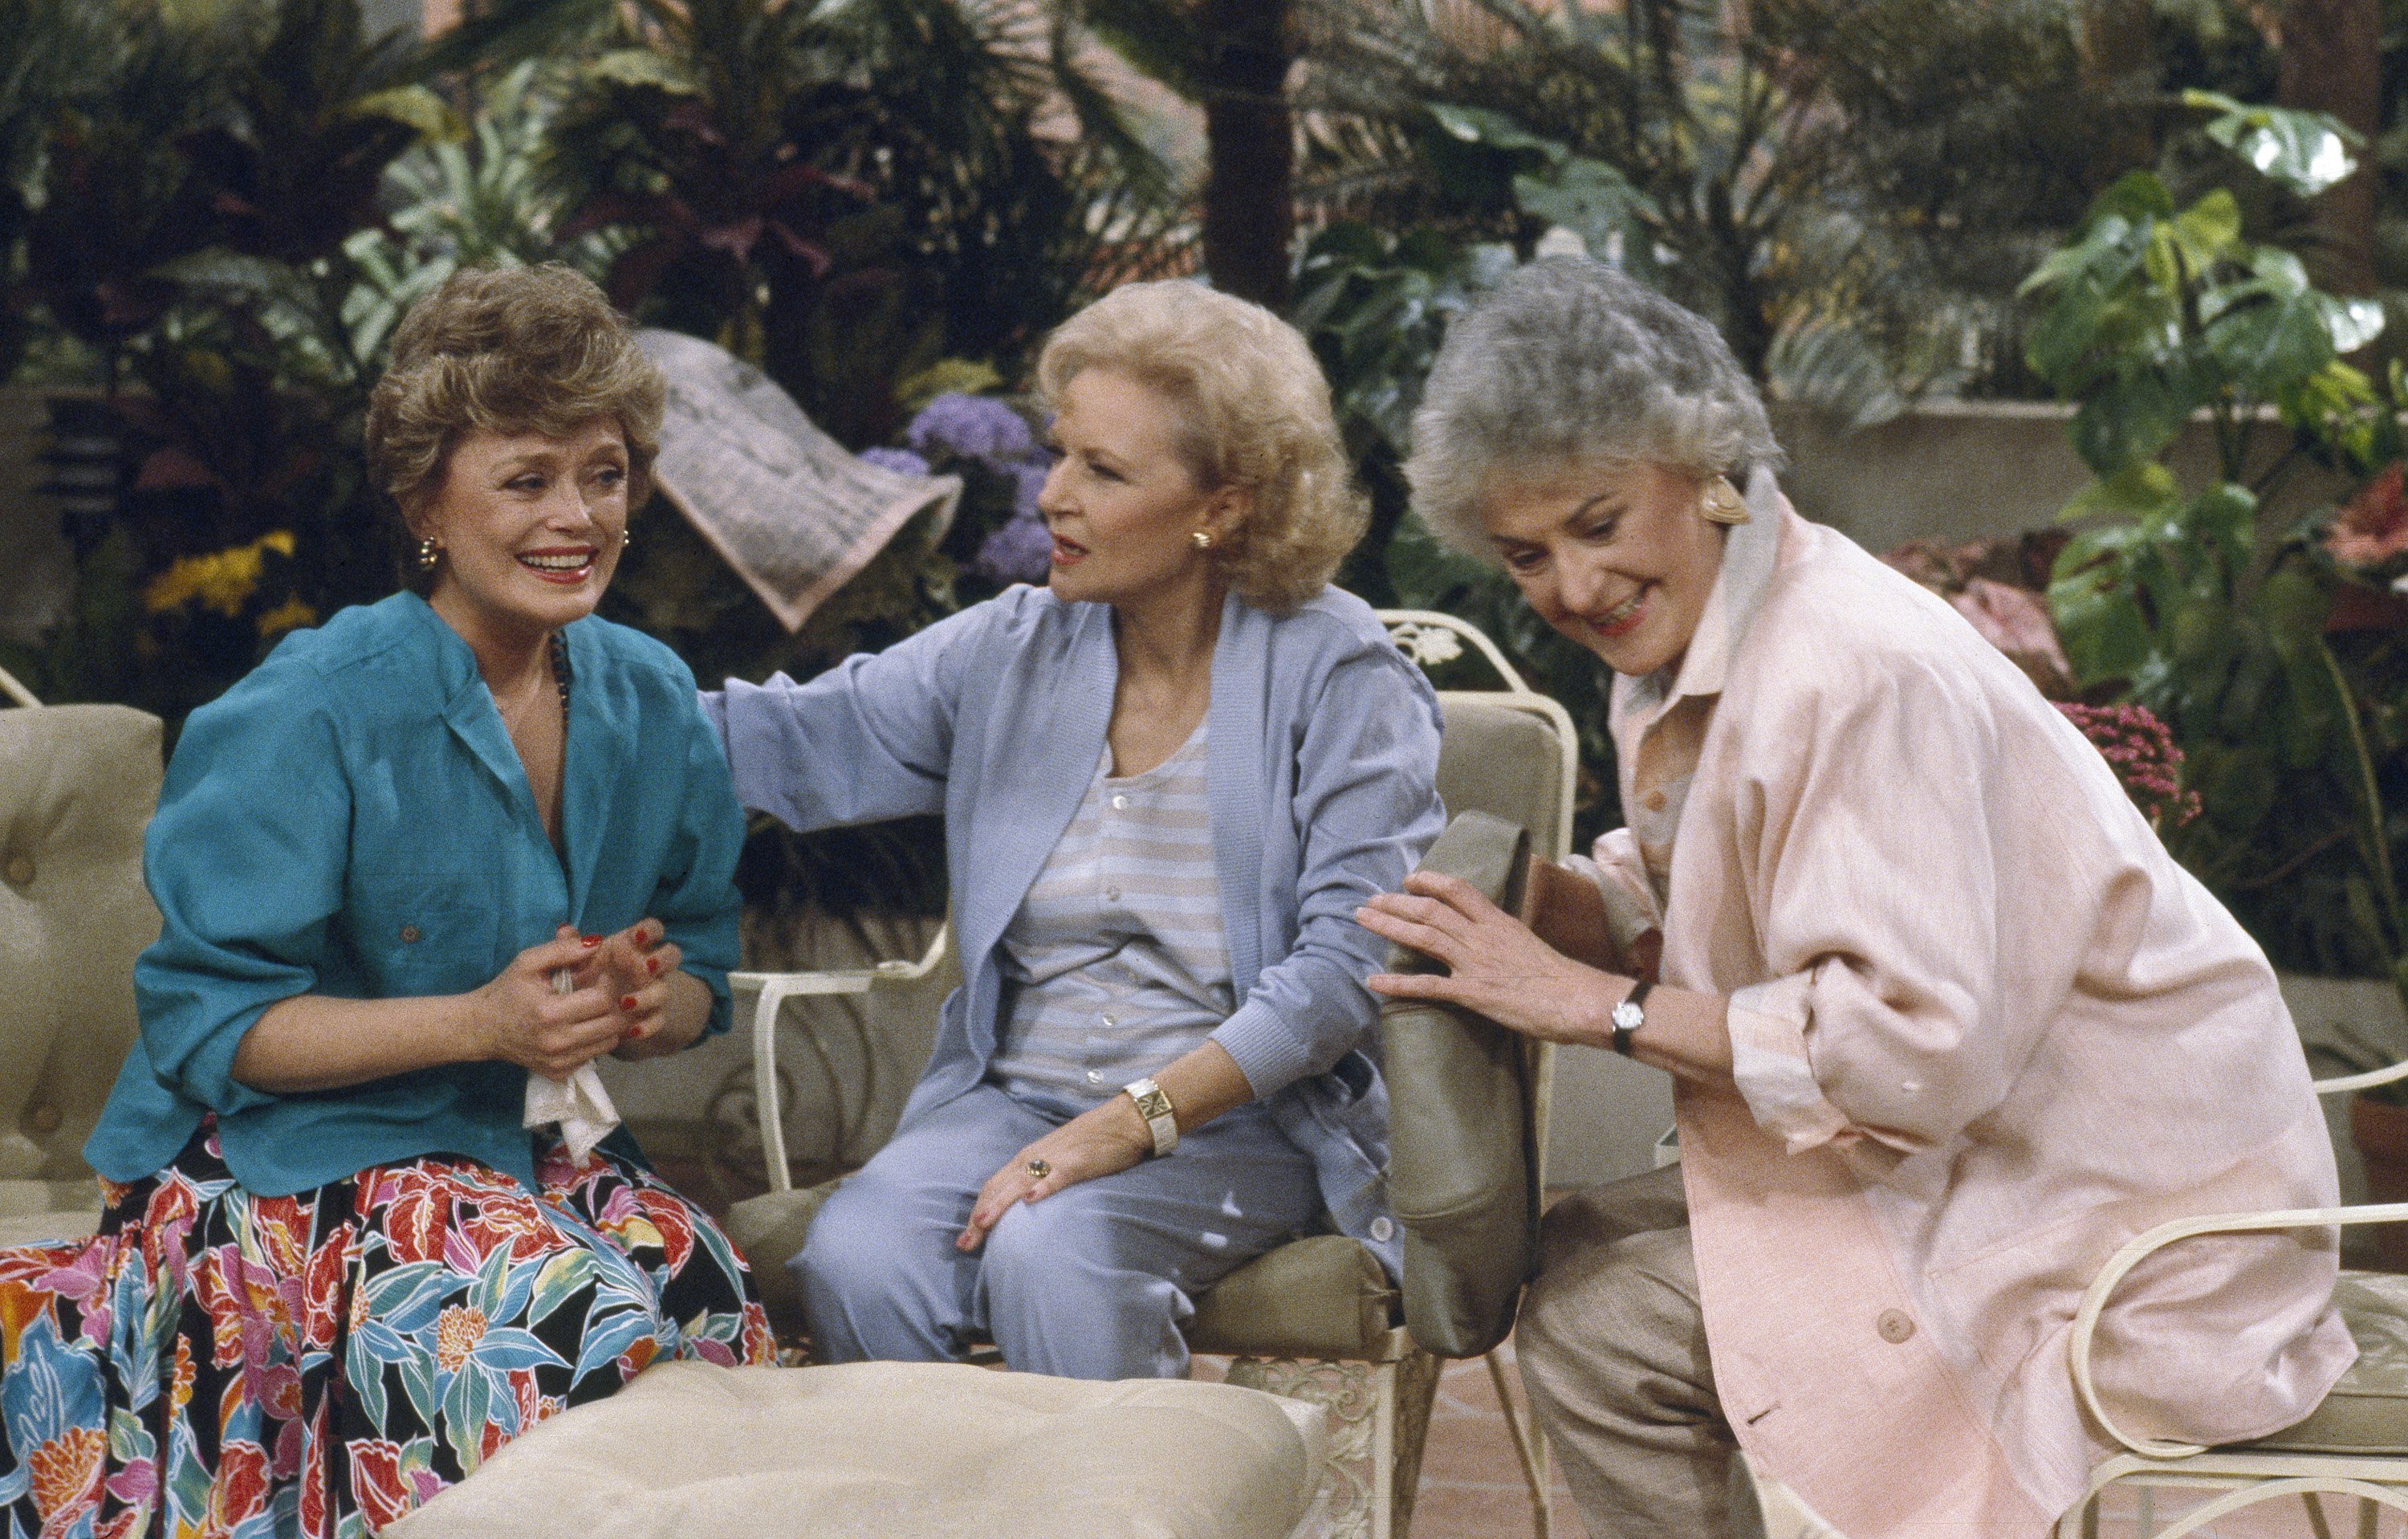 Cast of 'The Golden Girls': (l-r) Rue McClanahan as Blanche Devereaux, Betty White as Rose Nylund, Bea Arthur as Dorothy Petrillo Zbornak